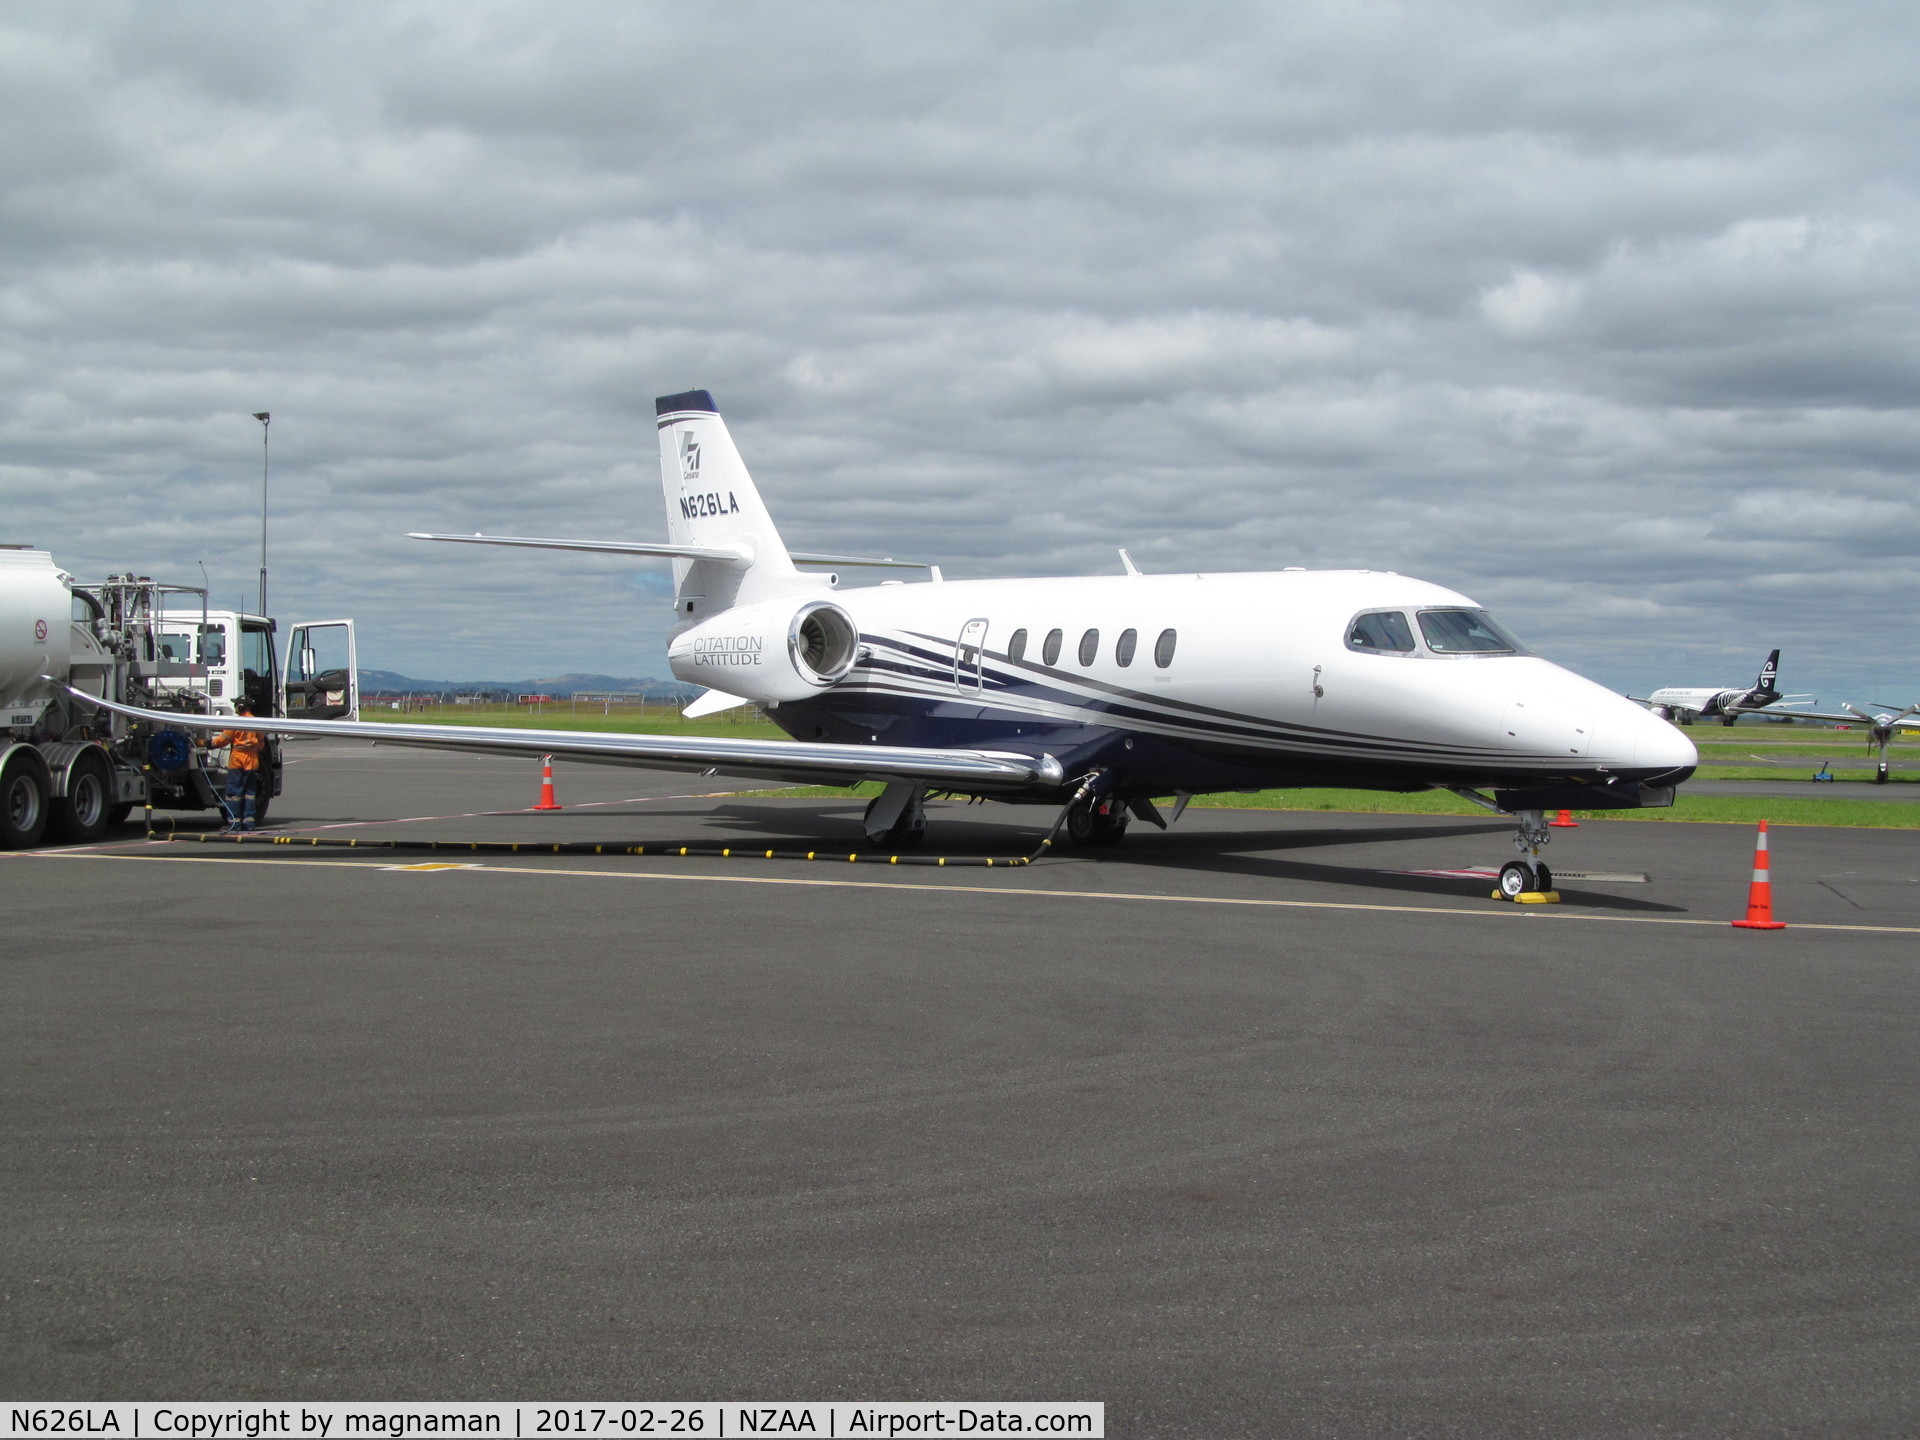 N626LA, 2016 Cessna 680A Citation Latitude C/N 680A-0026, at Auckland - not sure if used by bruce springstein or not (he was here yesterday)